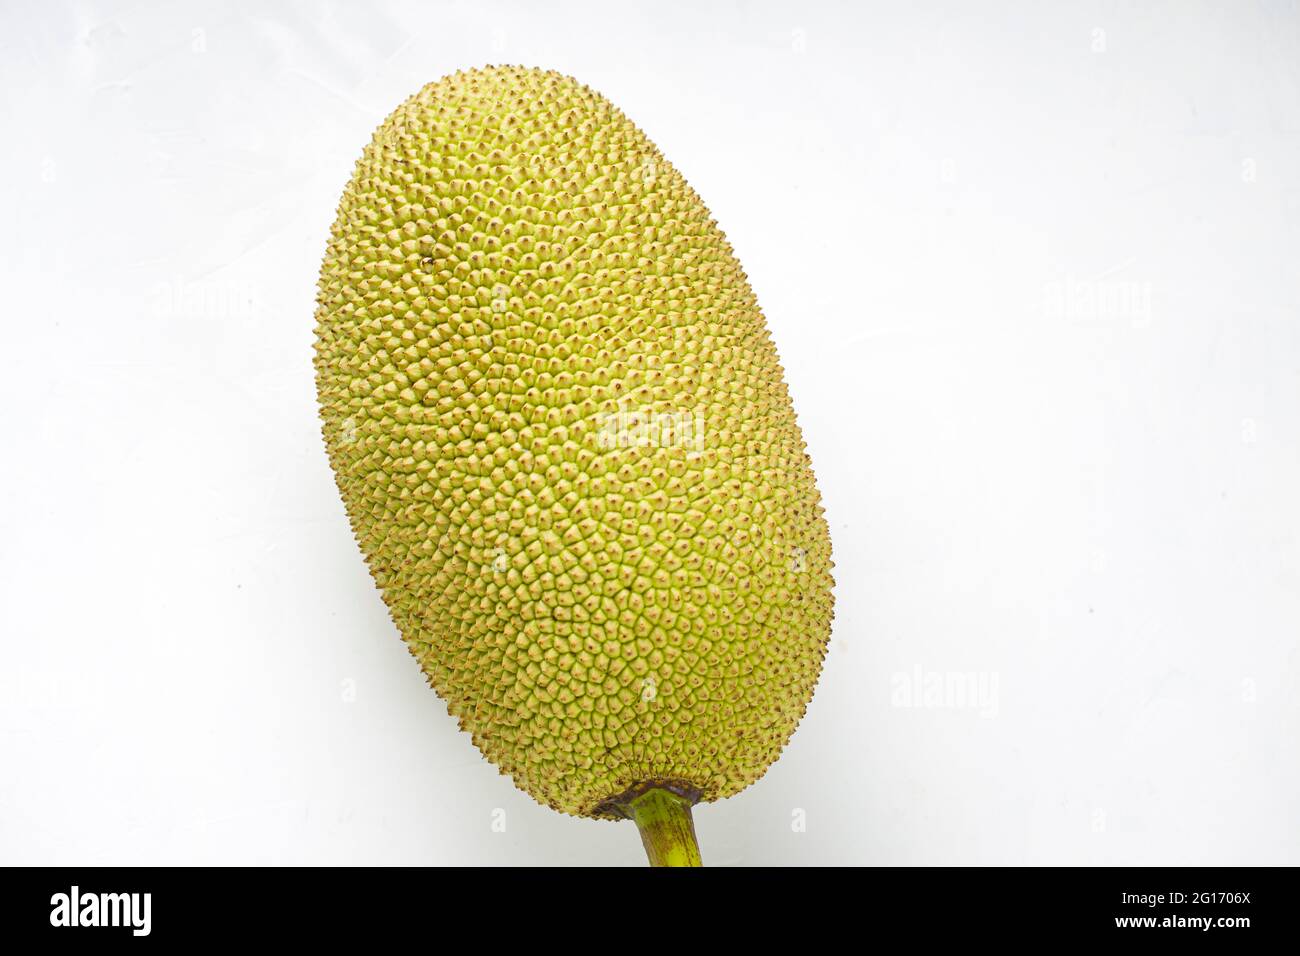 Jackfruit arranged beautifully in a grey and white textured background, isolated. Stock Photo